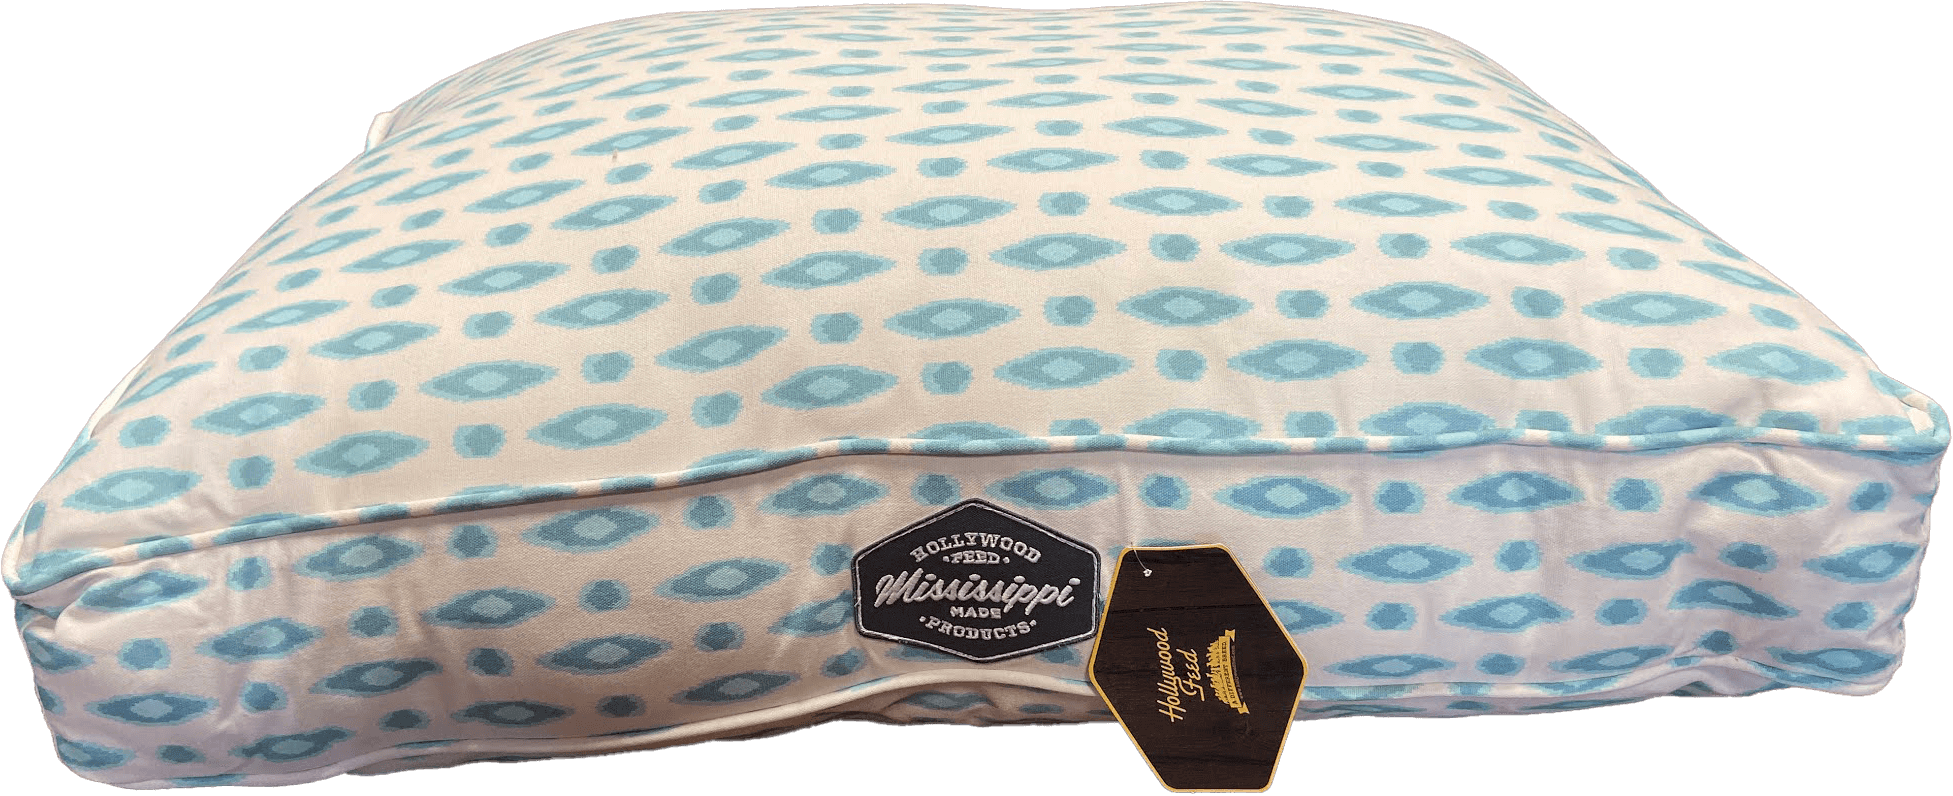 Hollywood feed mississippi made rectangle bed - cotton limited edition